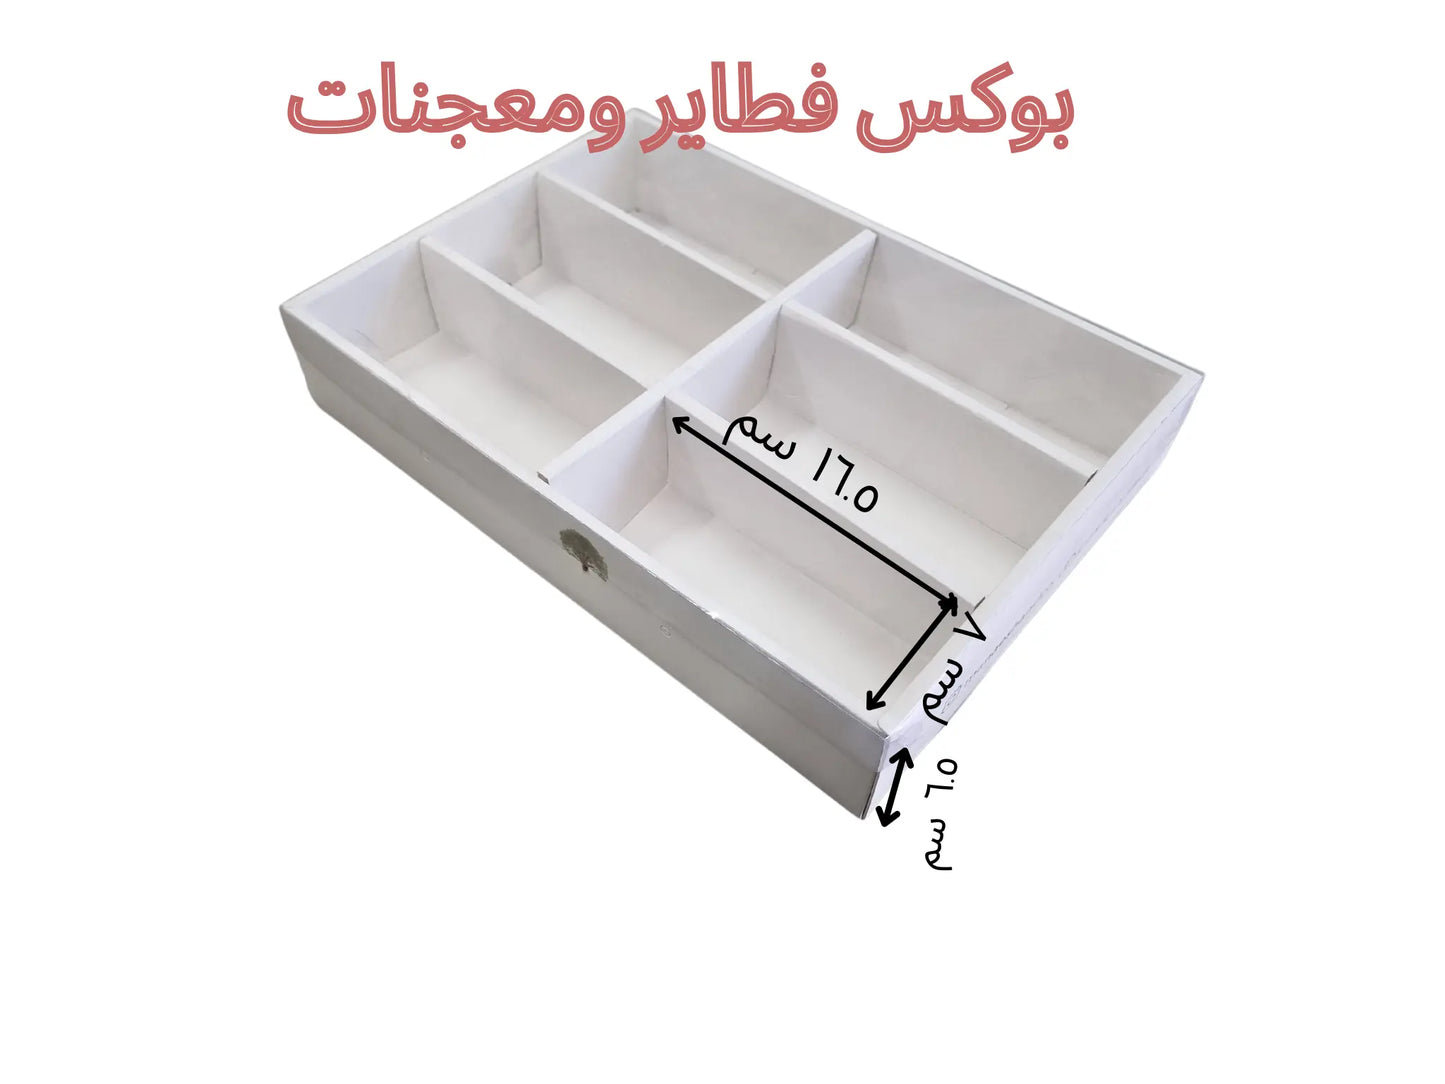 bakery pie box personalized printed with transparent top ,4 compartment each one 16.5×7×6.5 cm bakery pie box personalized printed with transparent top ,4 compartment each one 16.5×7×6.5 cm مطبعة مدار Madar Print